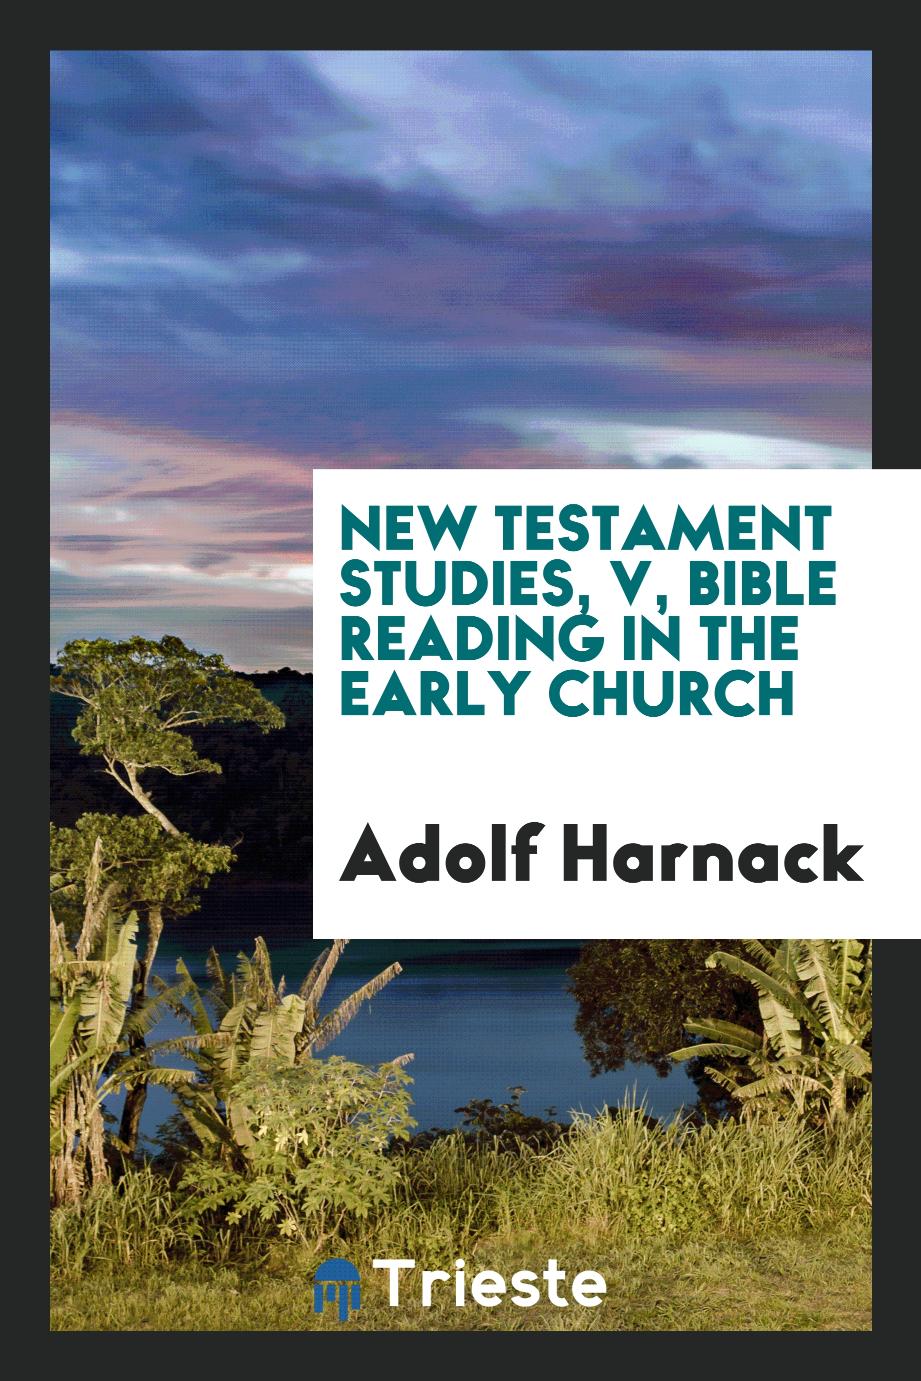 New Testament Studies, V, Bible reading in the early church